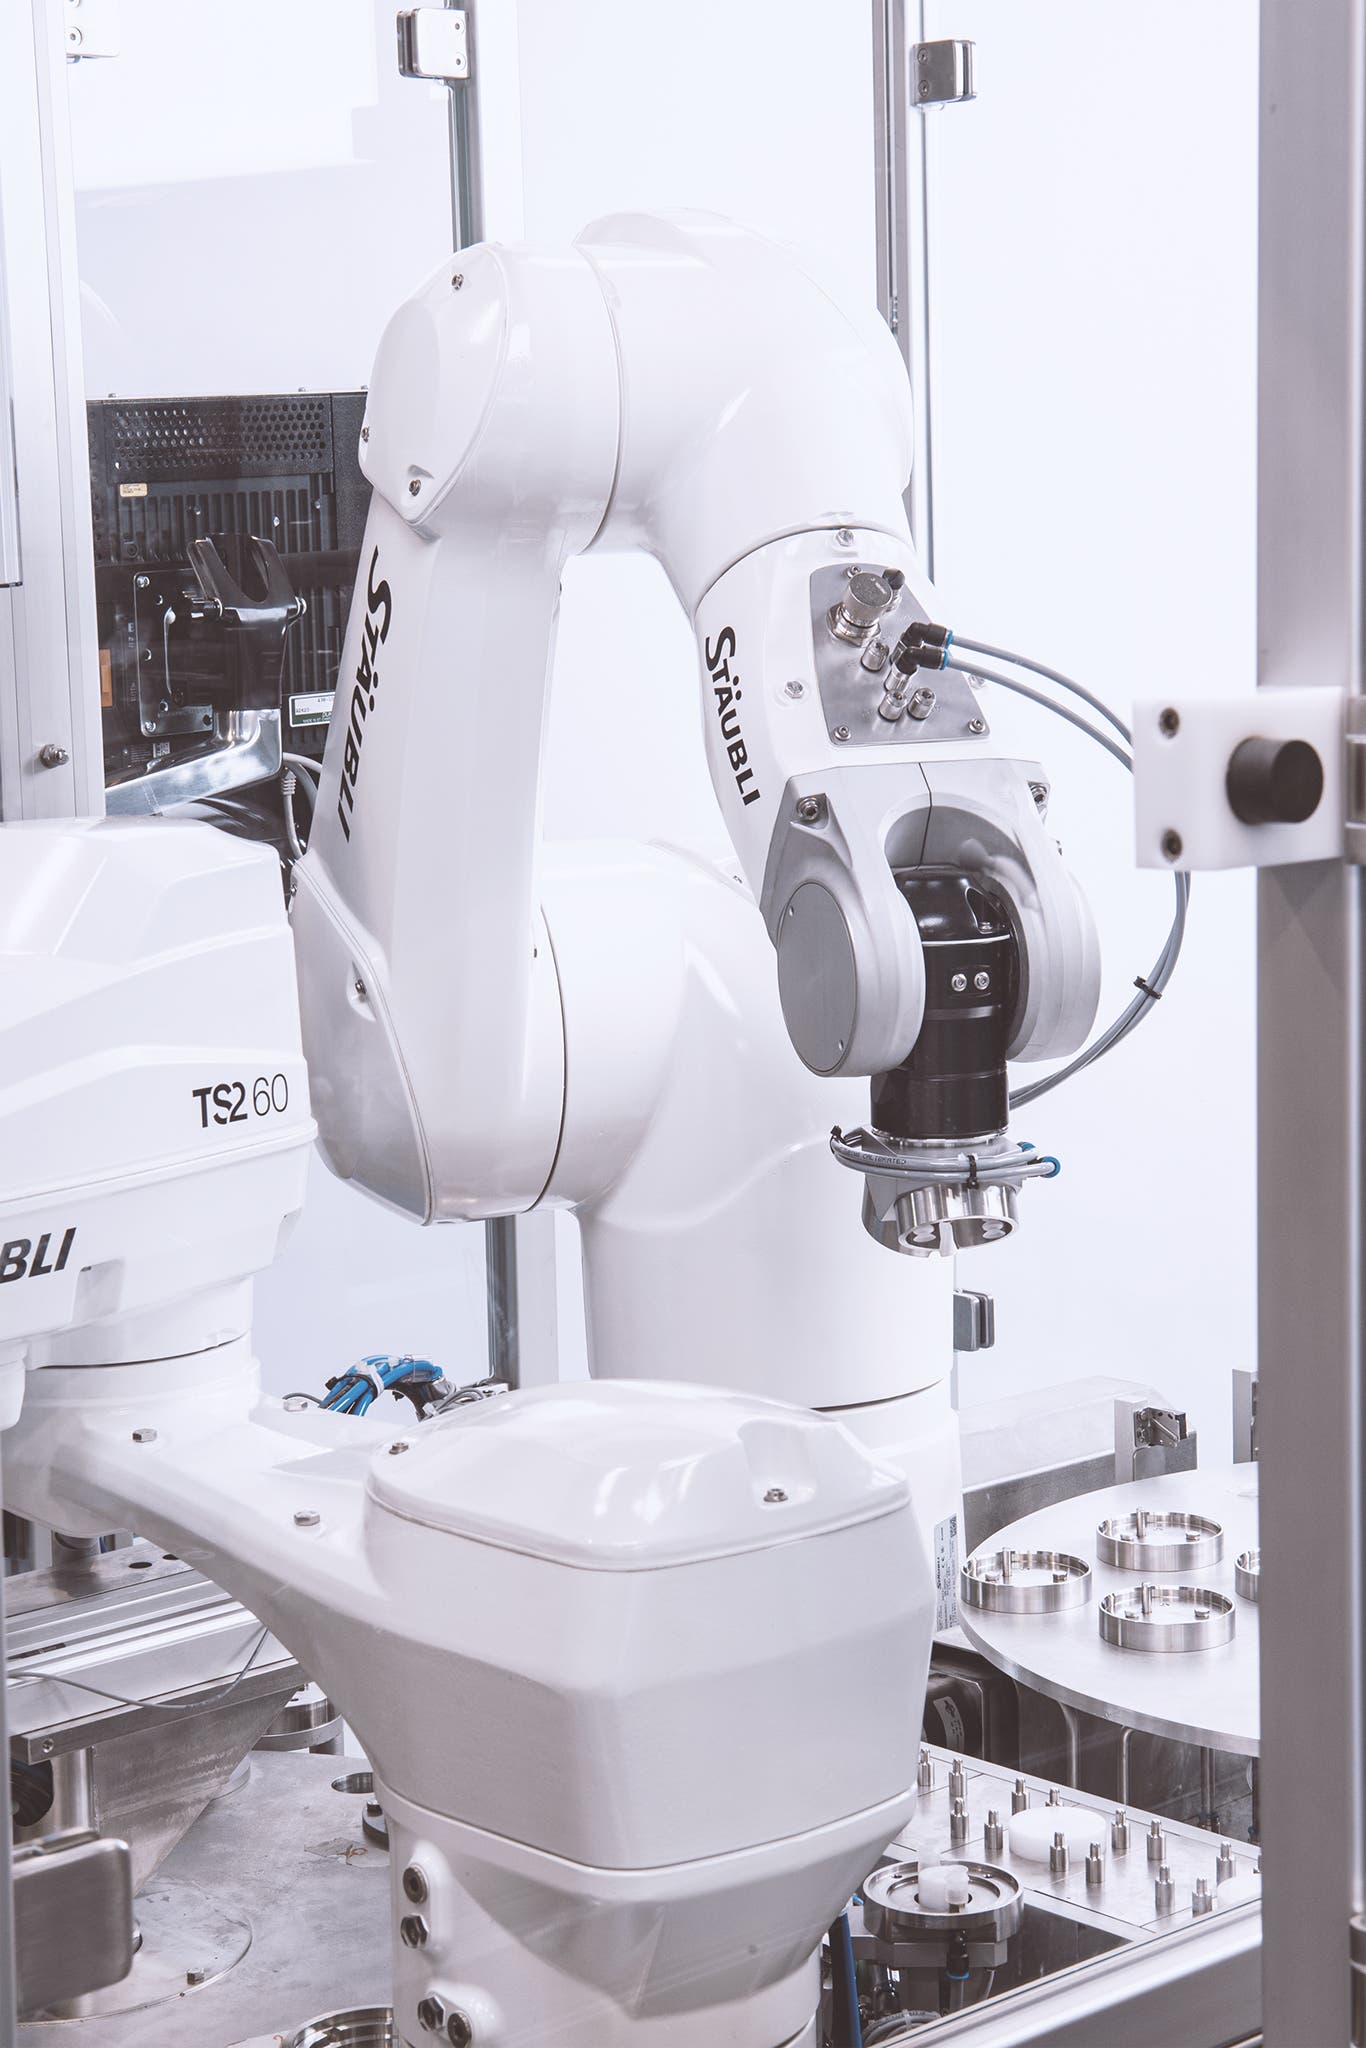 The two Stäubli robots impress in this application with their superior hygienic design.